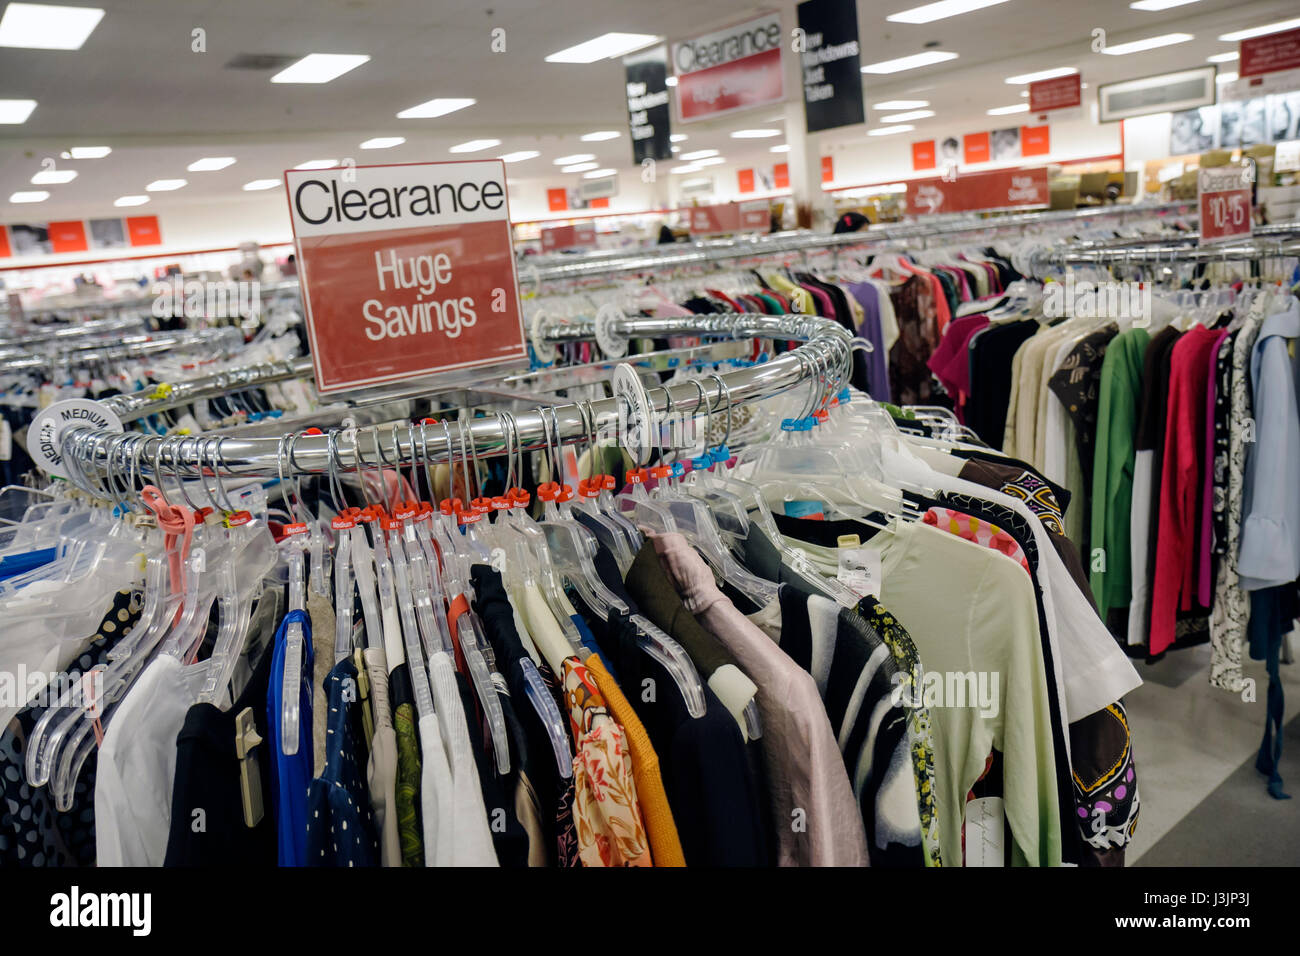 Miami Florida,T.J.Maxx,shopping shopper shoppers shop shops market markets marketplace buying selling,retail store stores business businesses,display Stock Photo